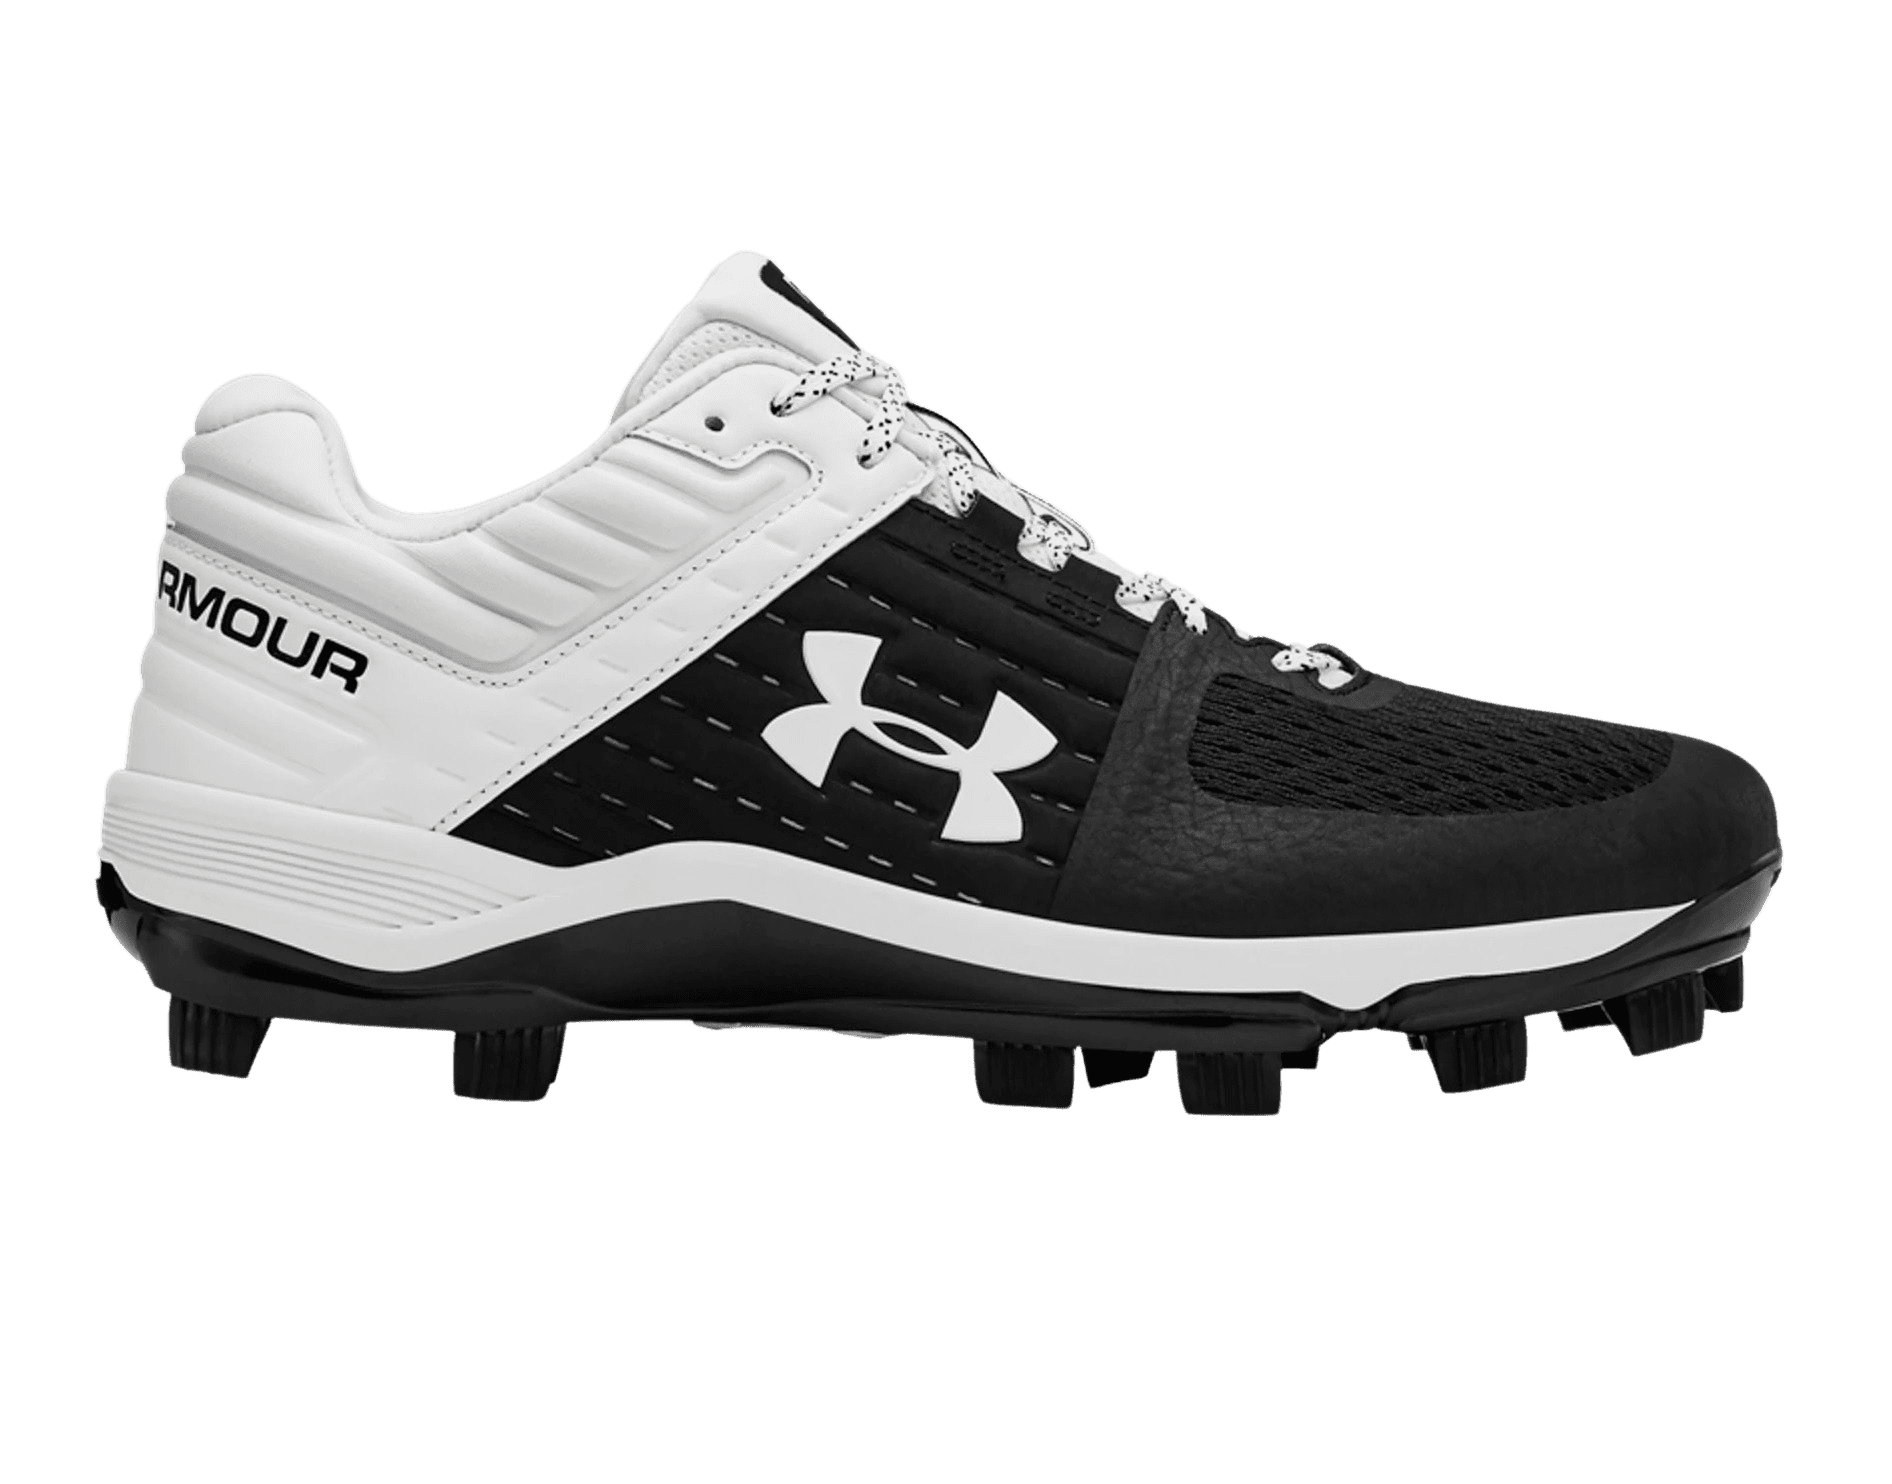 Under Armour New Other Mens Natural II Low Metal Baseball Cleats